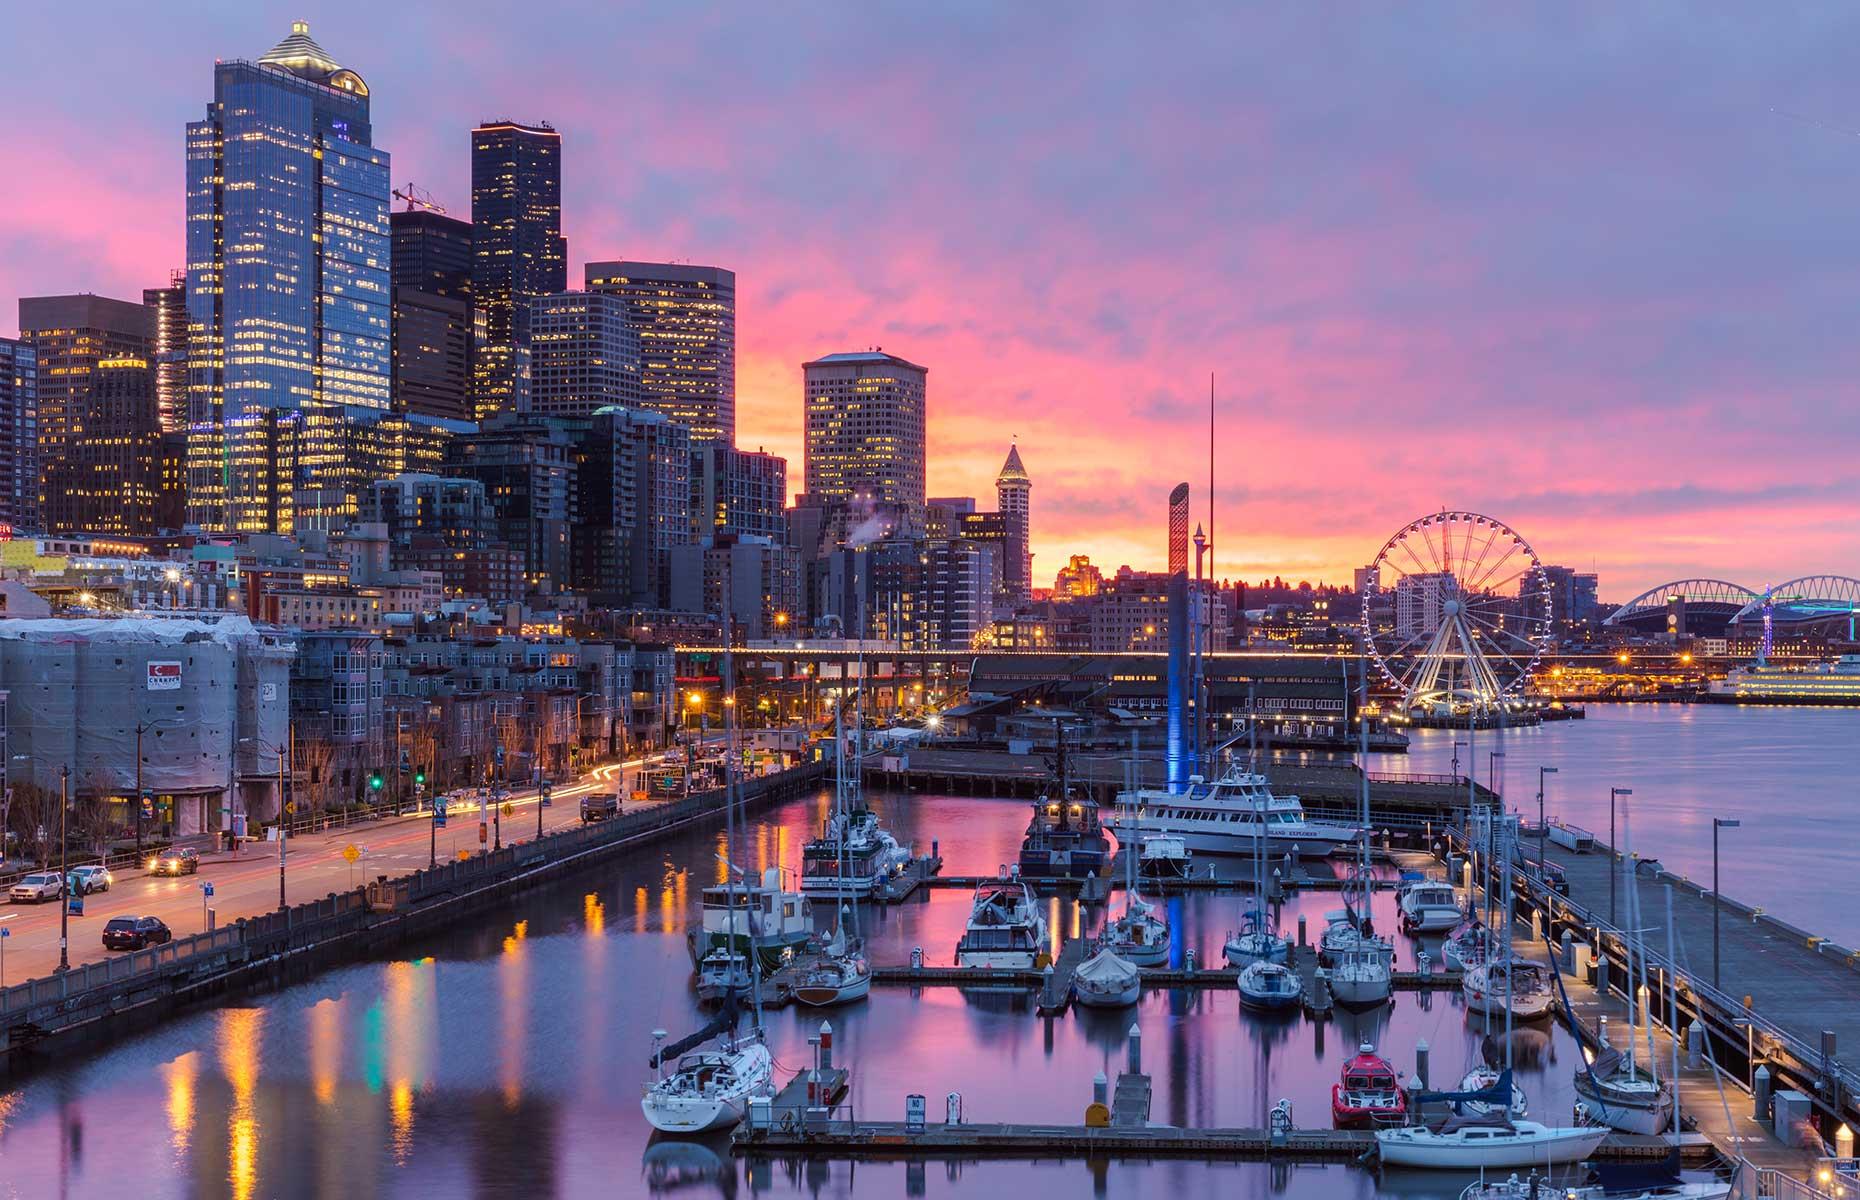 <p>Seattle regularly claims the top spot as North America’s most accessible city. From taxis and buses to airport shuttles and ferries, you can expect comfortable rides with ramps, elevators and a Link Light Rail system, all of which are wheelchair-friendly. But its accessibility extends beyond its transport…</p>  <p><a href="https://www.loveexploring.com/guides/74956/explore-seattle-the-top-things-to-do-where-to-stay-what-to-eat"><strong>Here are more things to do and see in Seattle</strong></a></p>